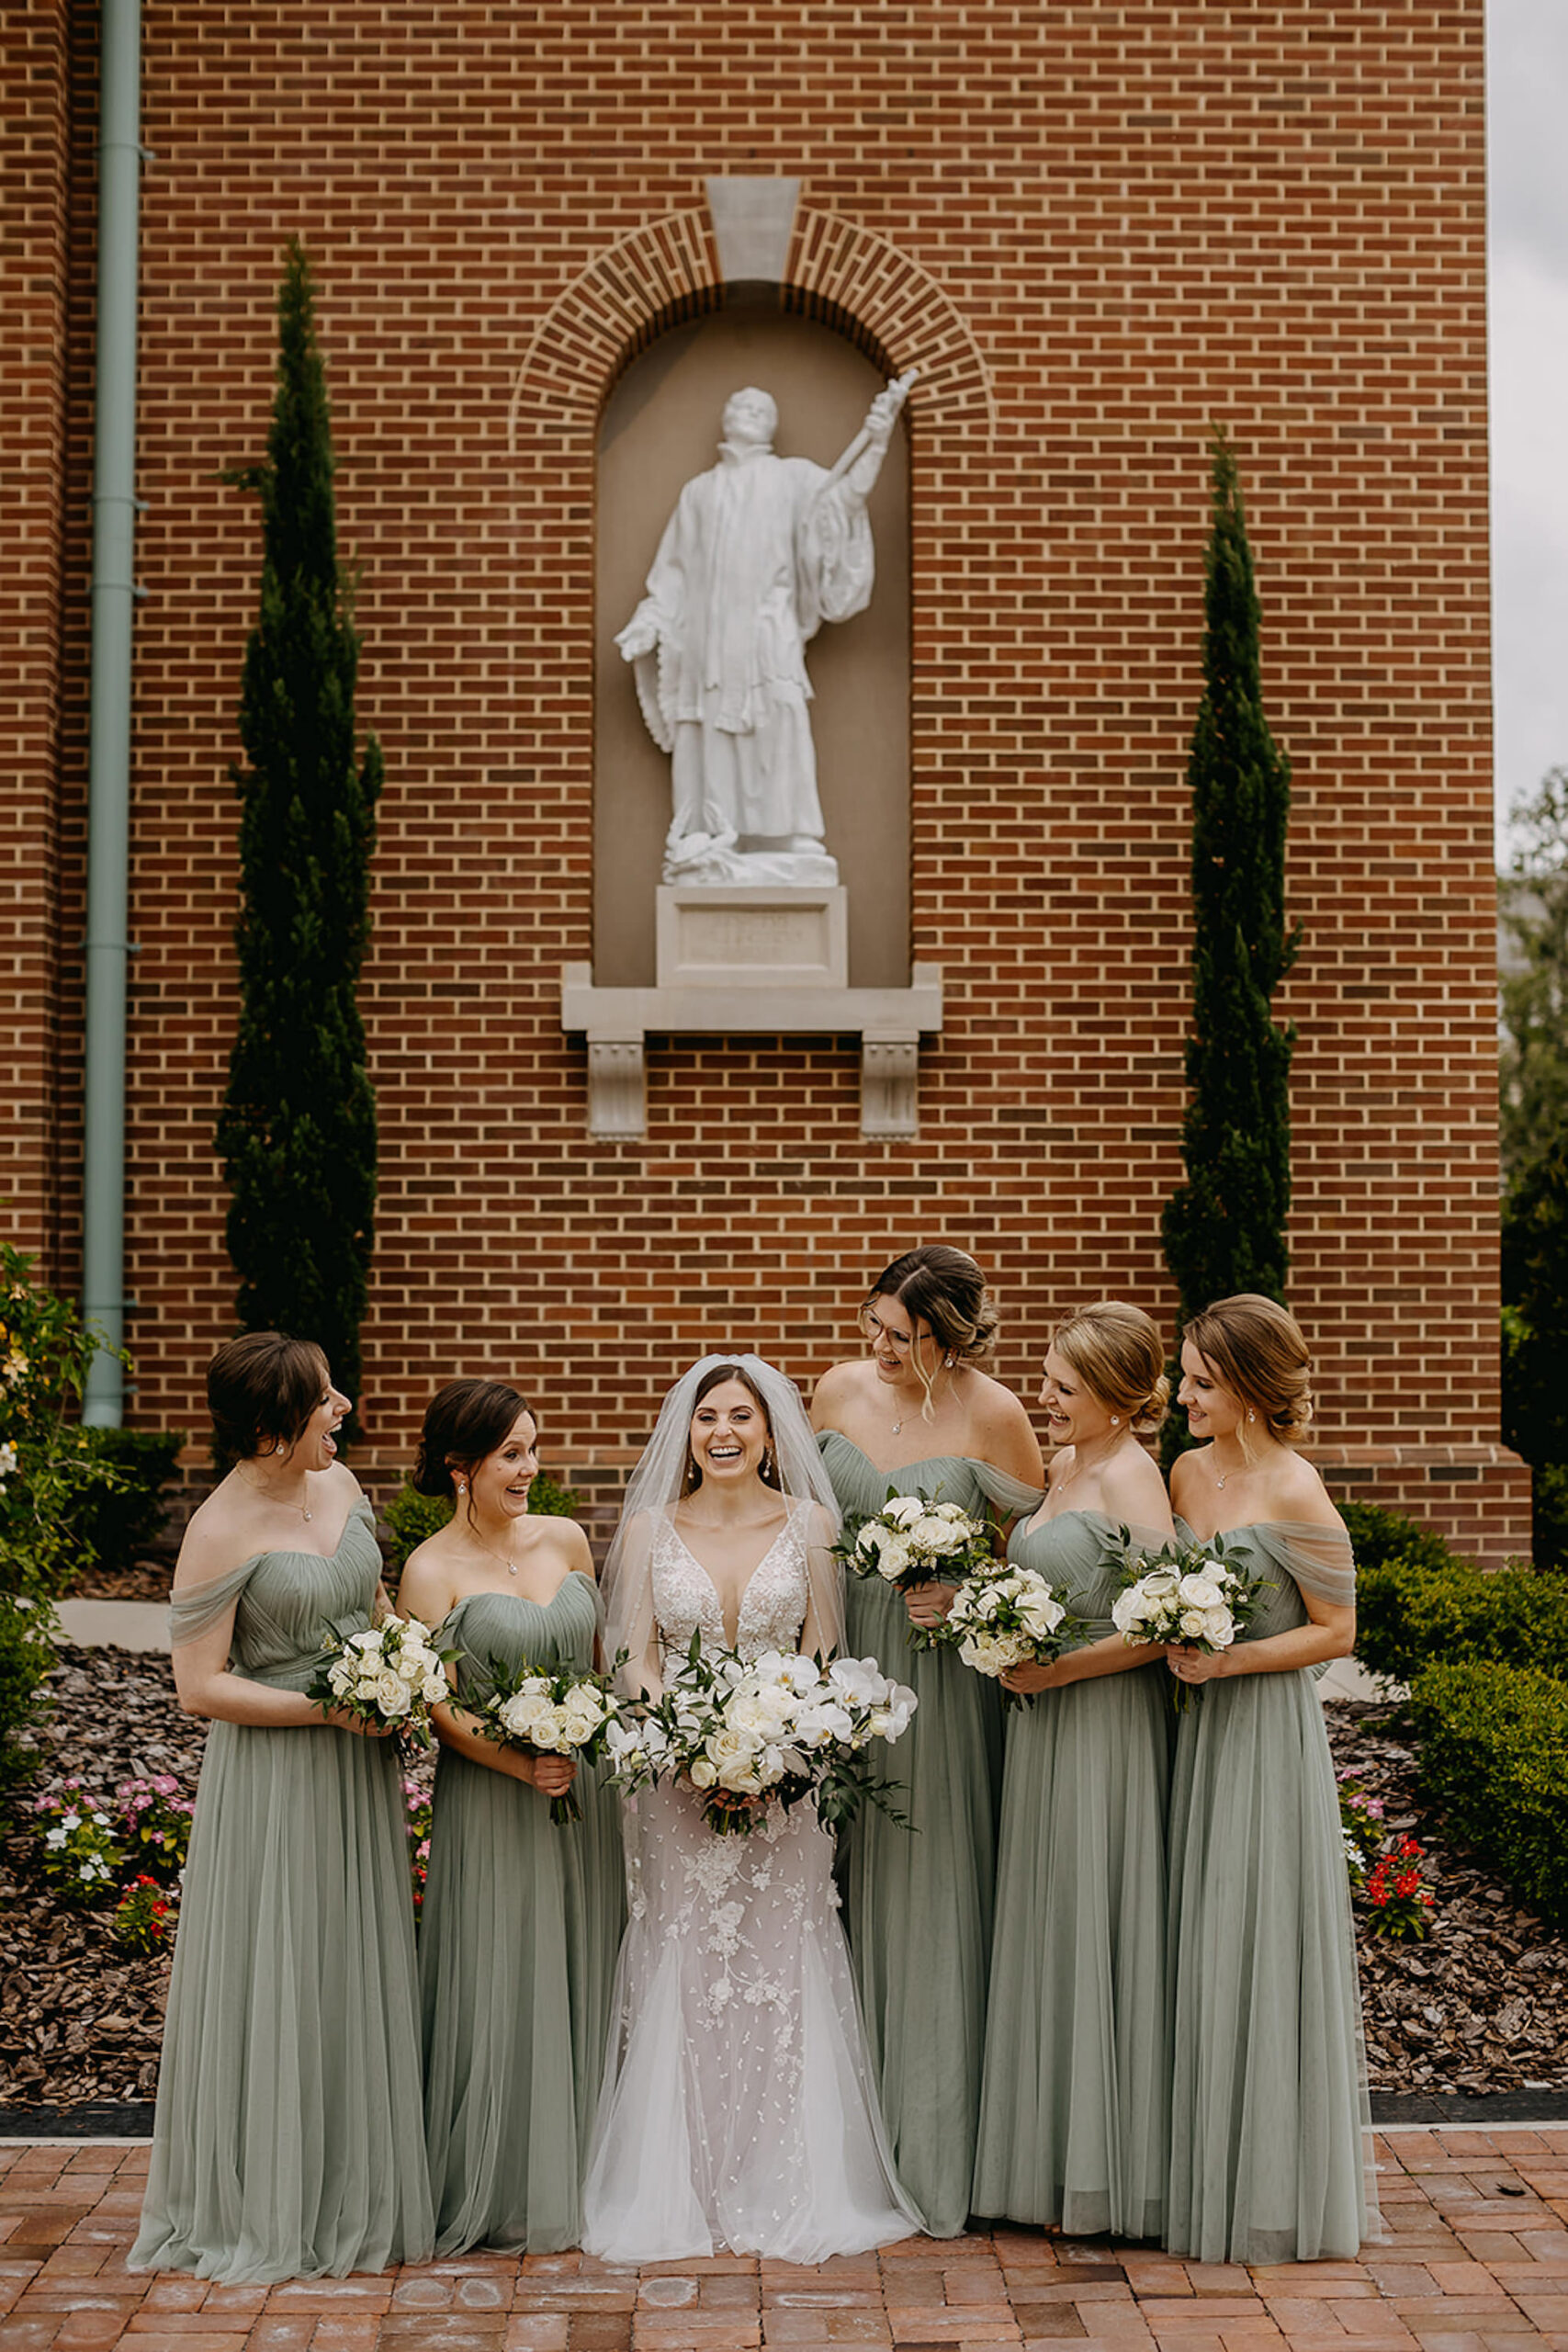 Matching Off-the-shoulder Sage Green Floor Length Tulle Bridesmaid Dress Inspiration | White Orchid and Rose with Ruscus Greenery Bridal Bouquet | Tampa Bay Florist Monarch Events and Design